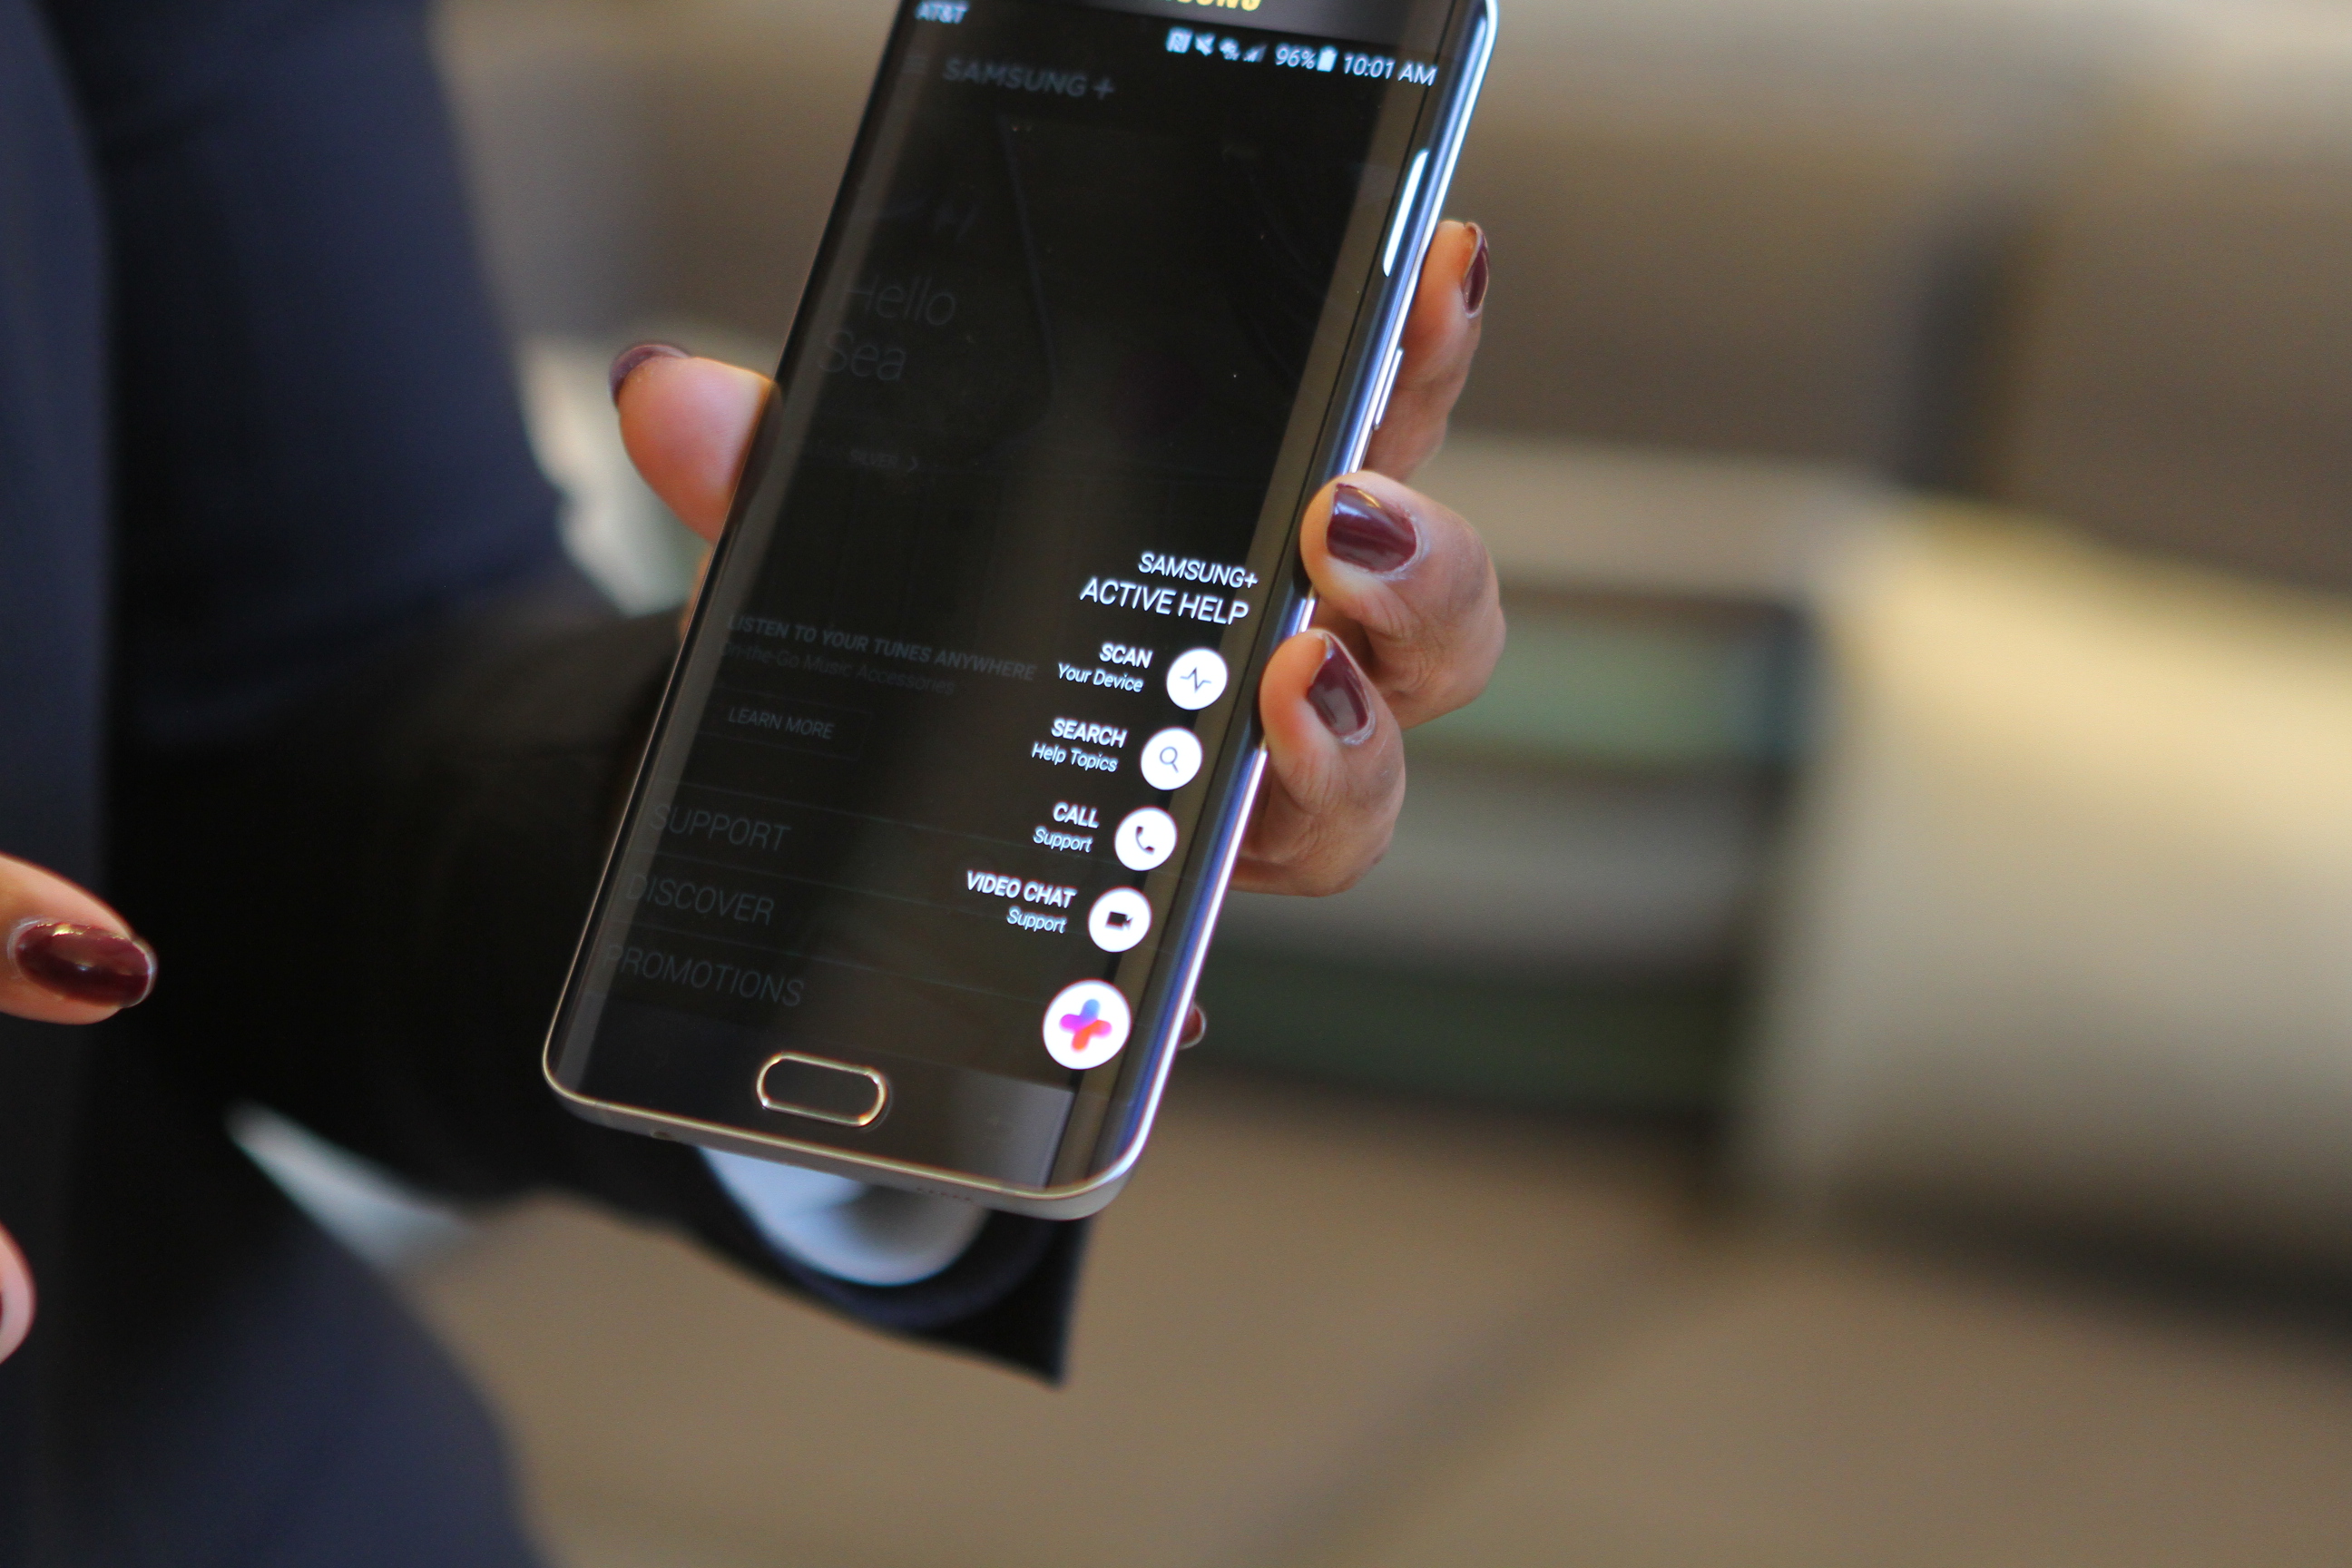 Samsung's Galaxy S7 and S7 edge smartphones come with customer support features.